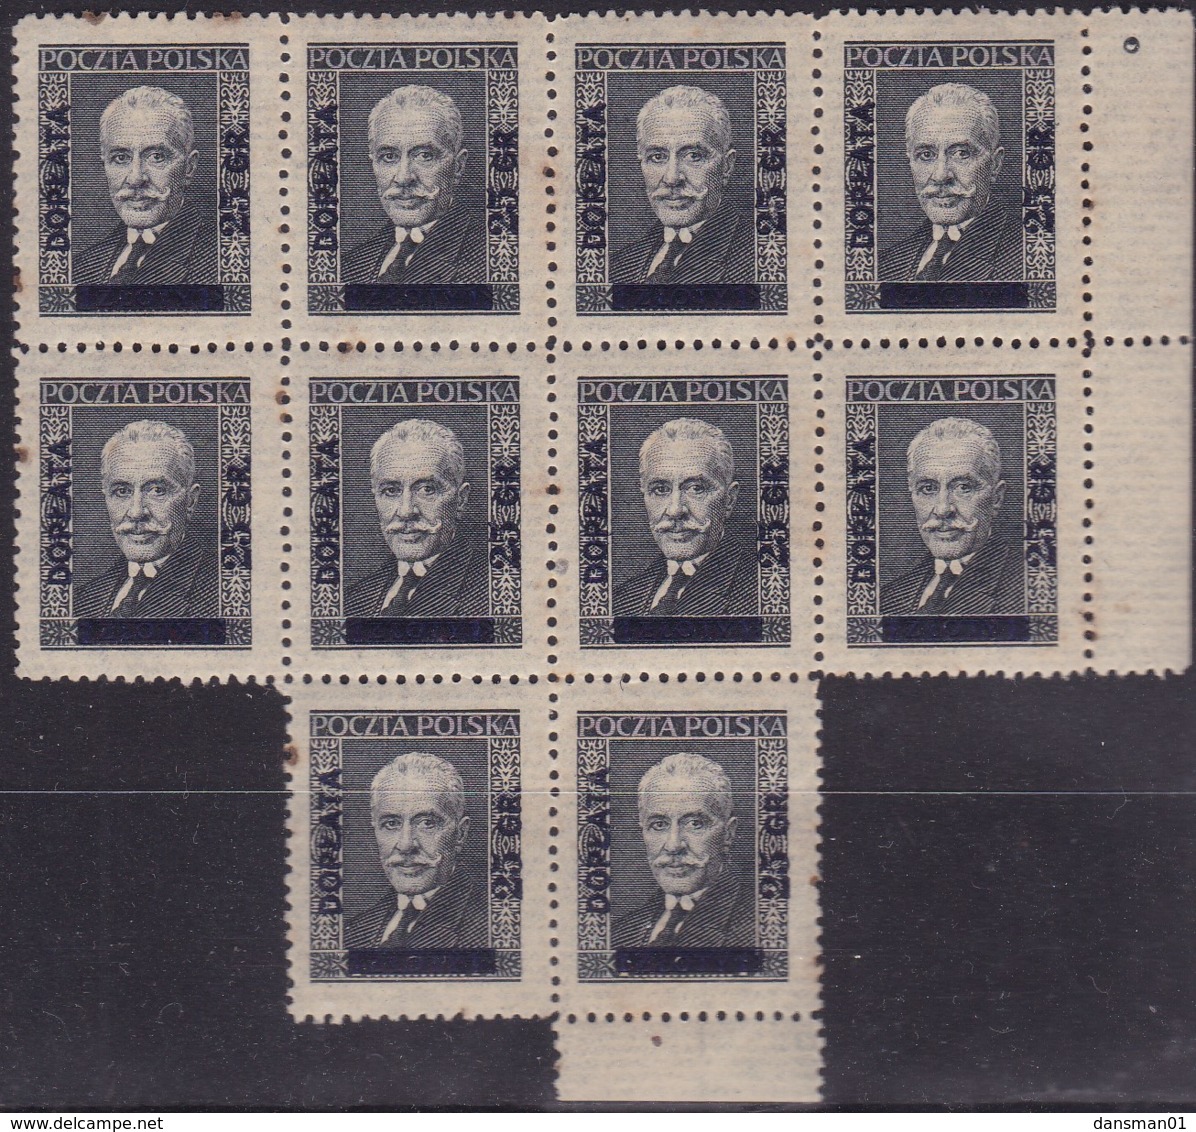 POLAND 1934 Postage Due Fi D91 Mint Hinged Block Of 10 - Postage Due